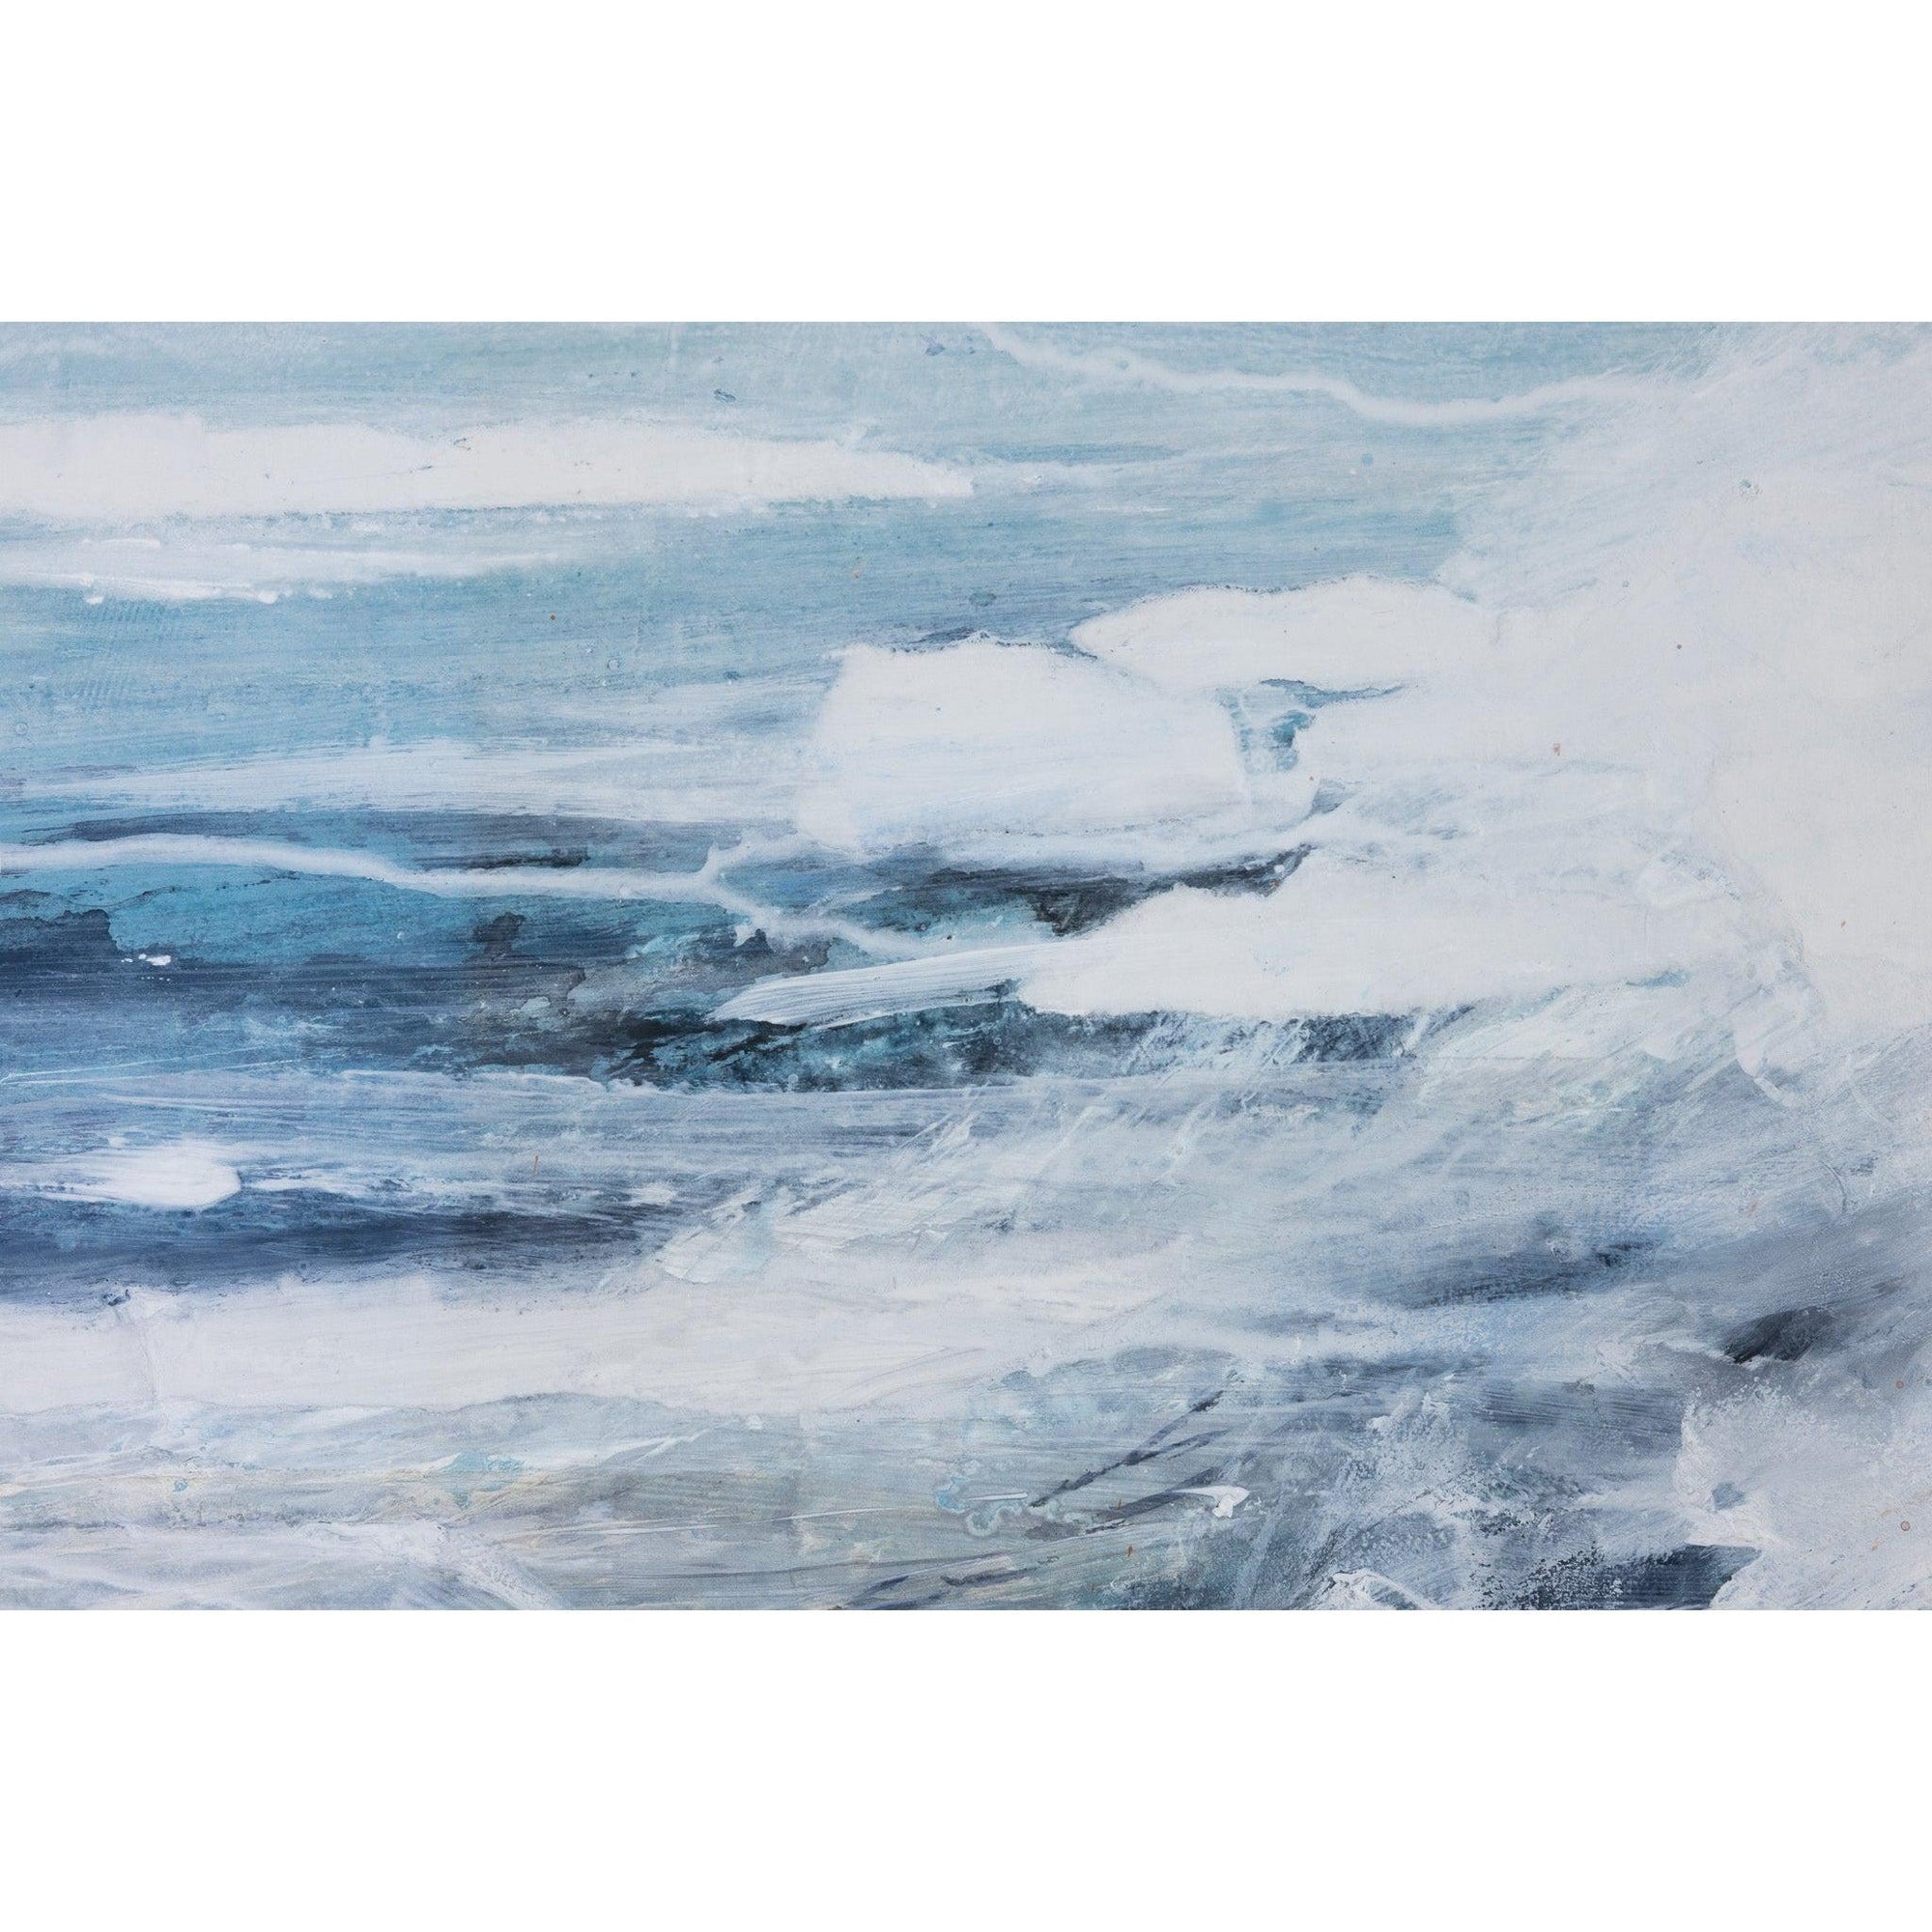 'Onrushing Tide' mixed media original by Jo Ellis, available at Padstow Gallery, Cornwall